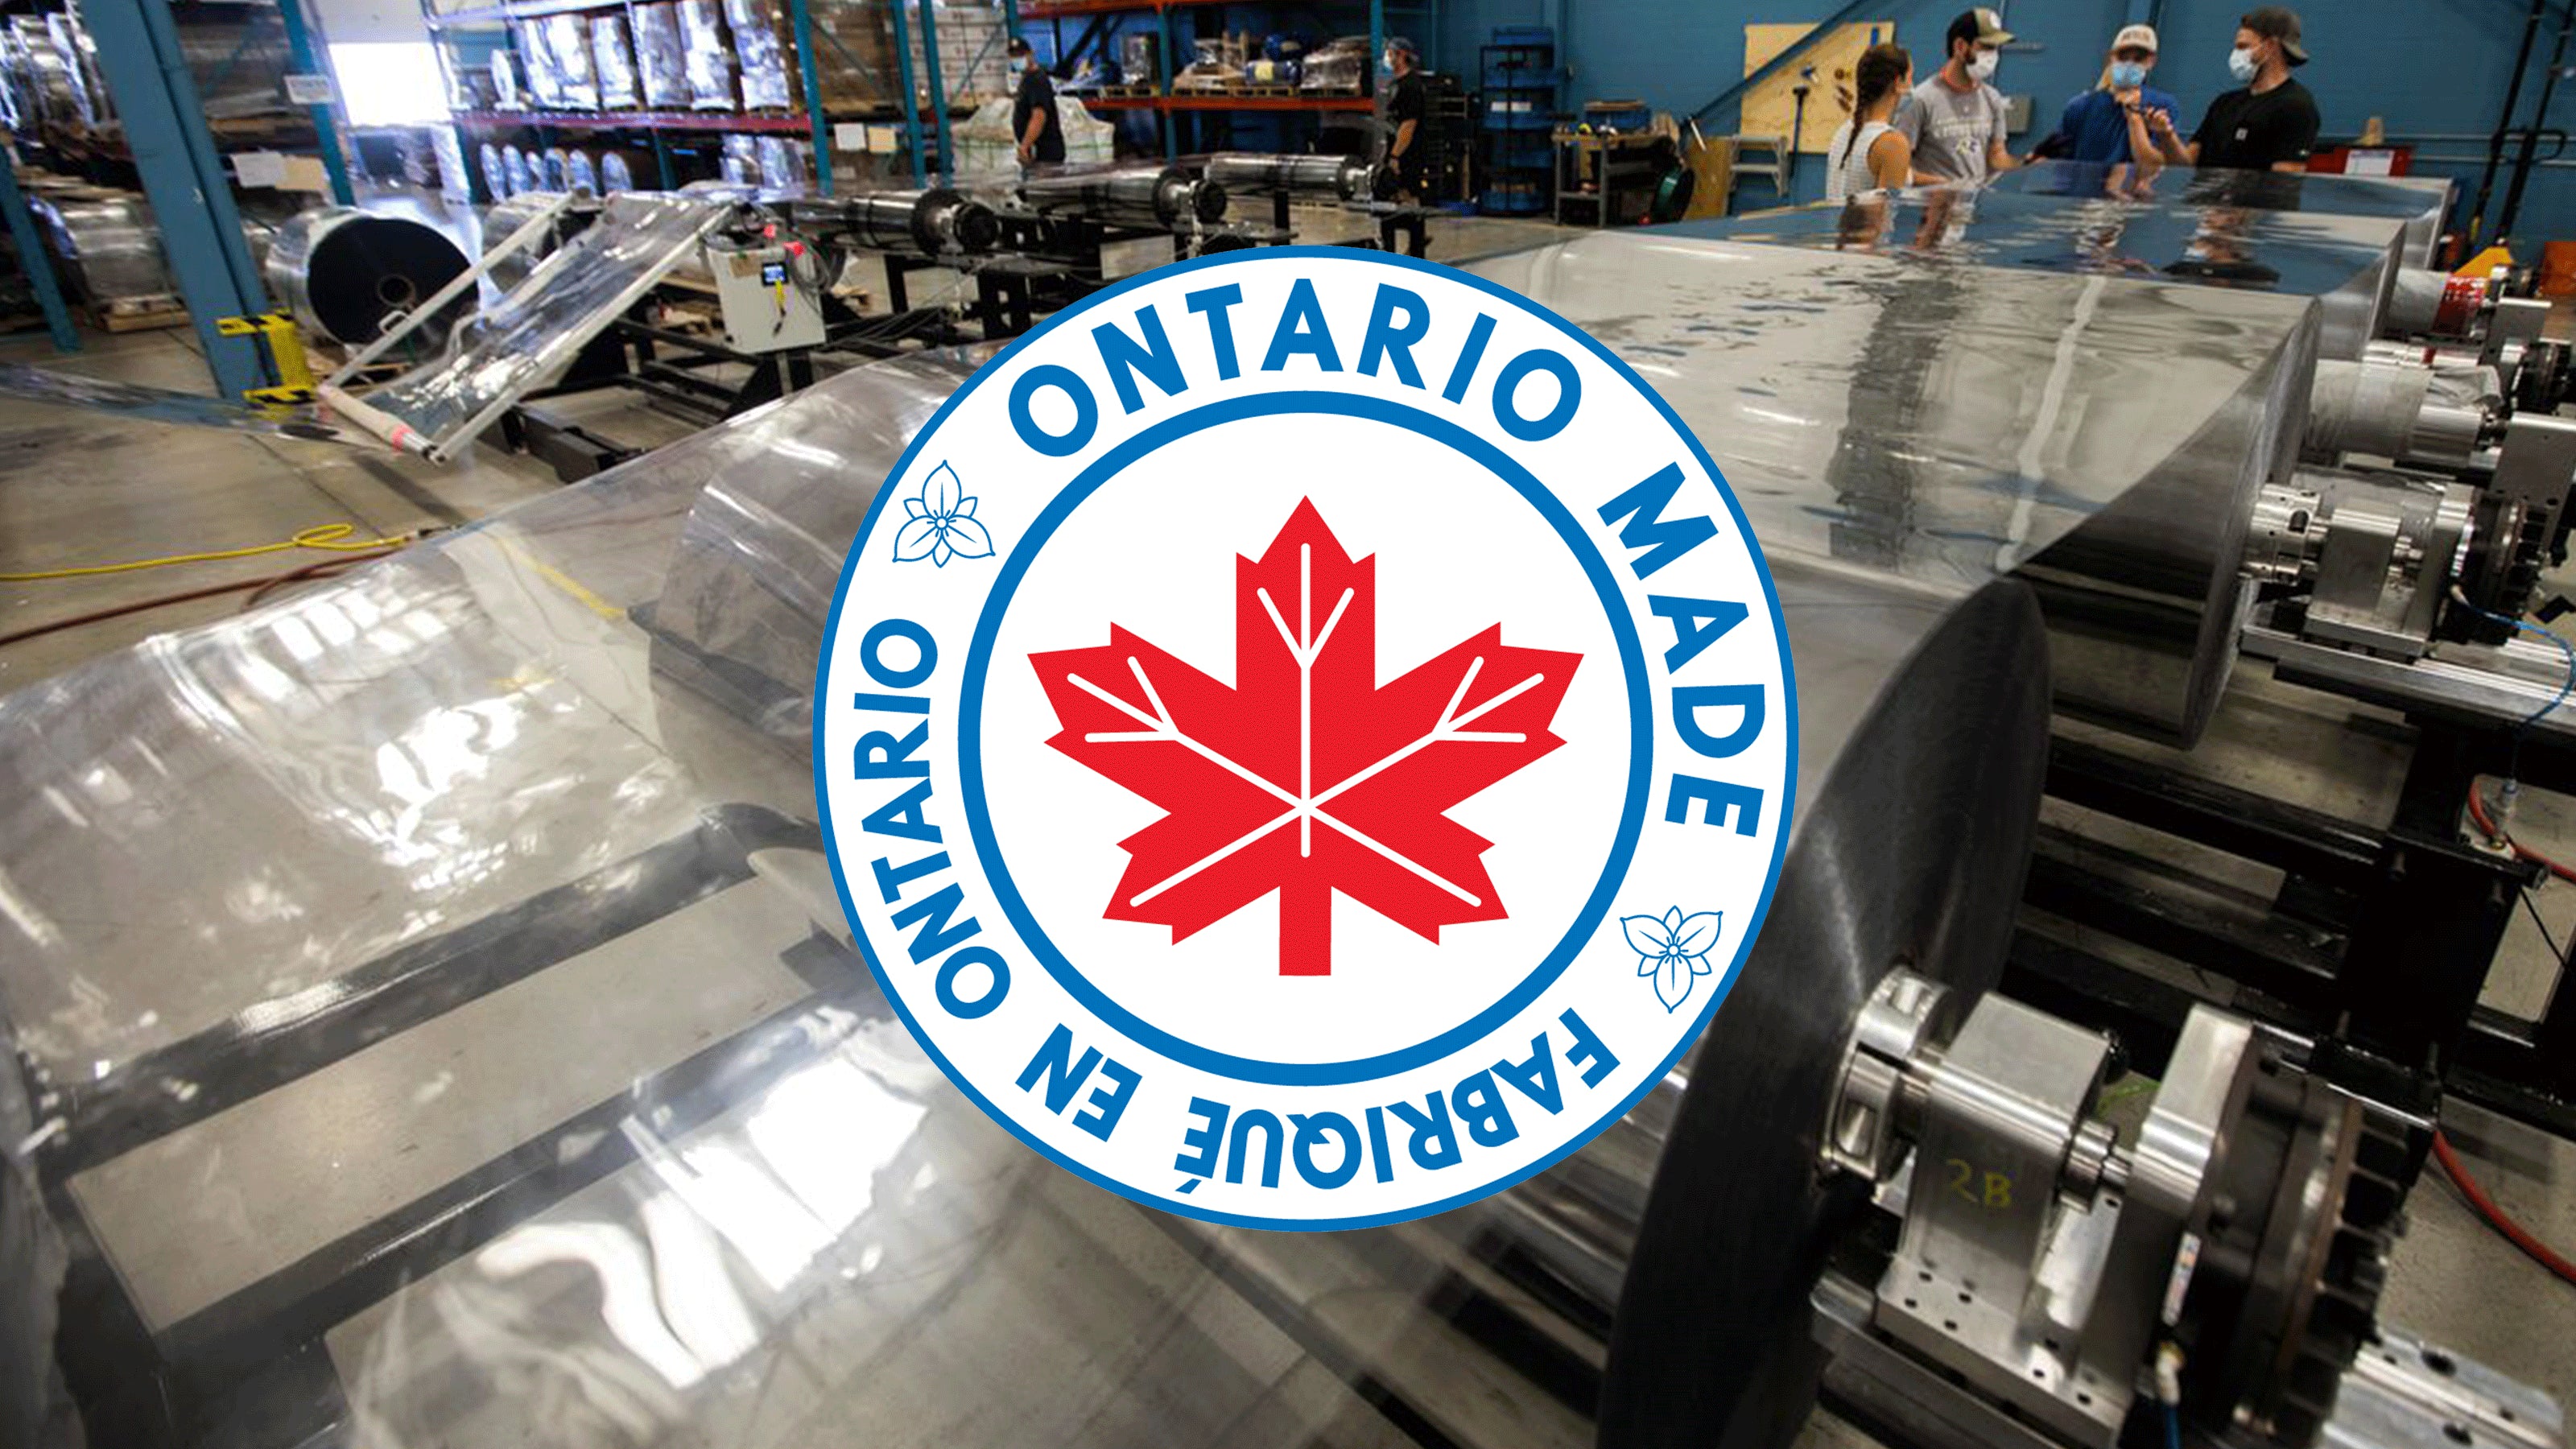 Ontario Made / Fabrique En Ontario logo over top of the plastic sheeting used to make face shields at The Canadian Shield in Waterloo, Ontario.